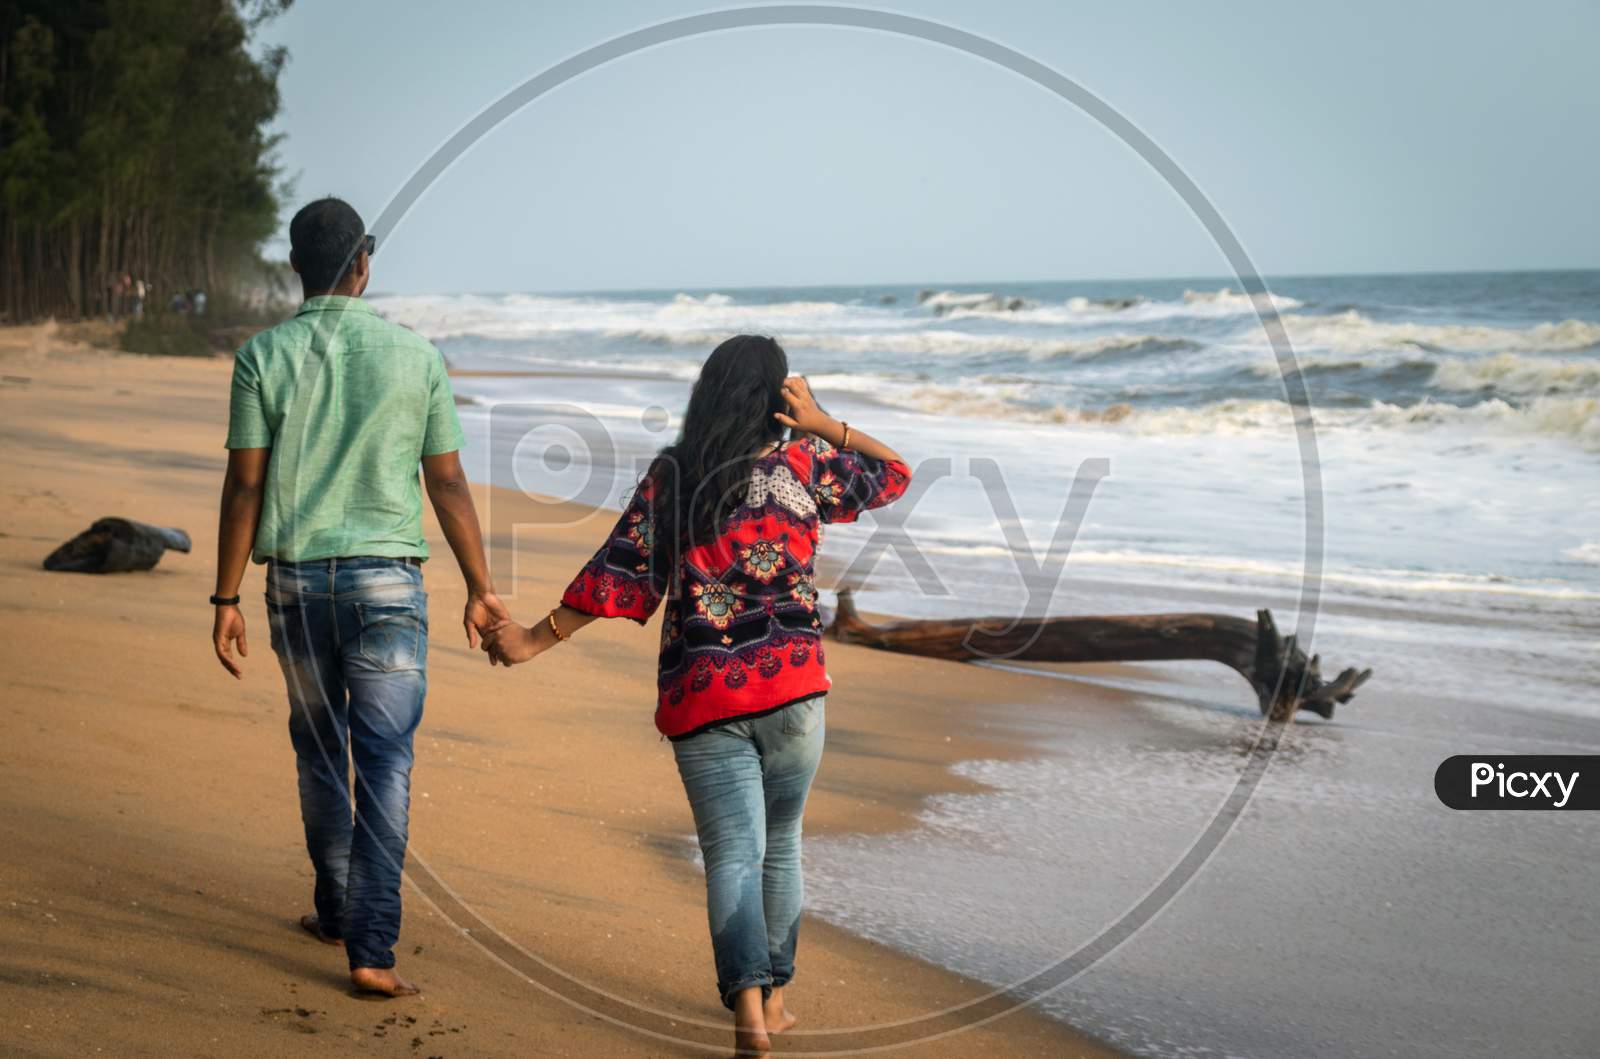 Couple Walking On Sandy Beach With Holding Each Others Hand And Soaking Up The Natural Sea View Image Is Taken At Kochi Kerala India Showing The Love And Affection Of The Couple In The True Nature.